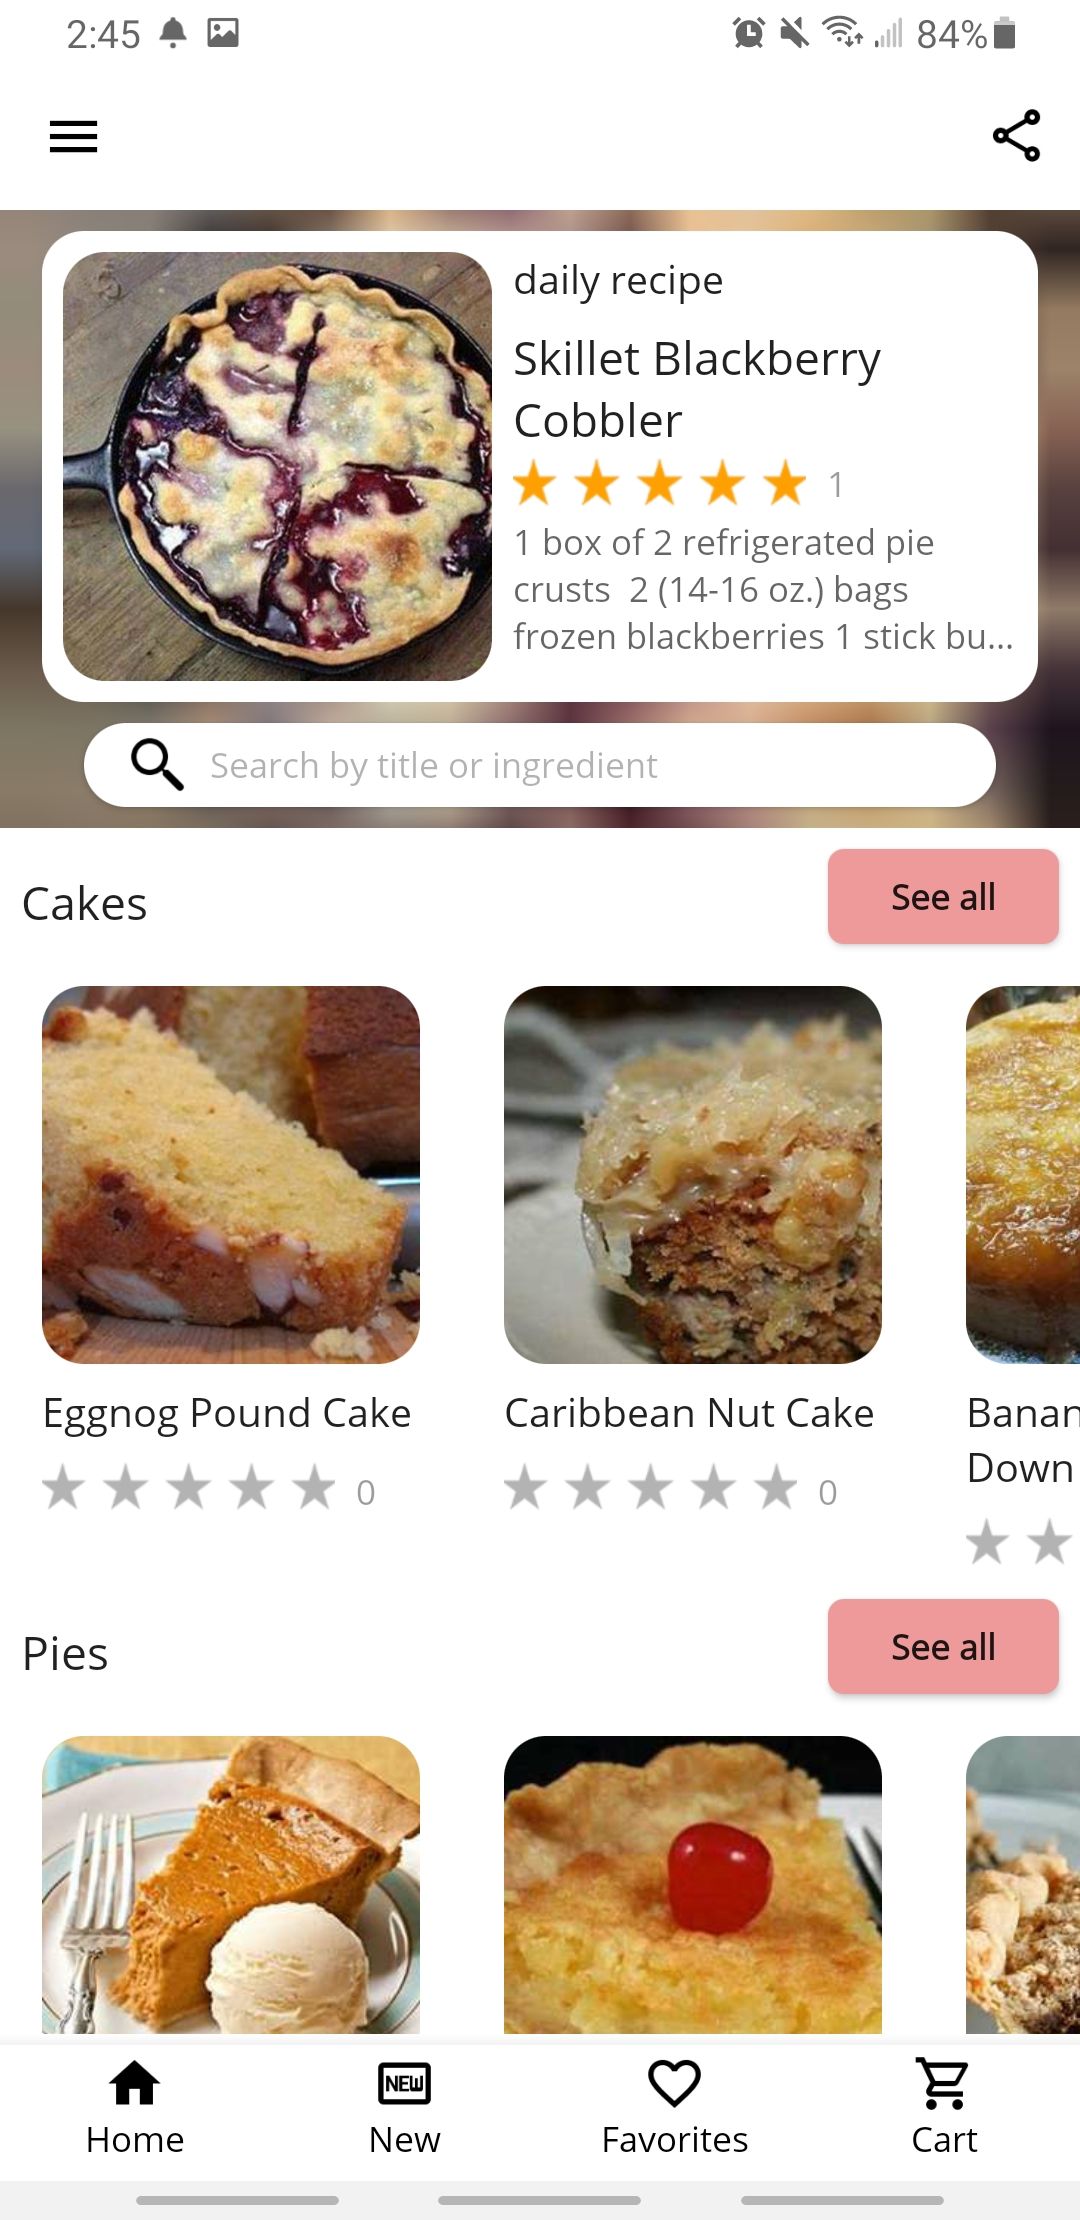 cake and baking recipes app home page